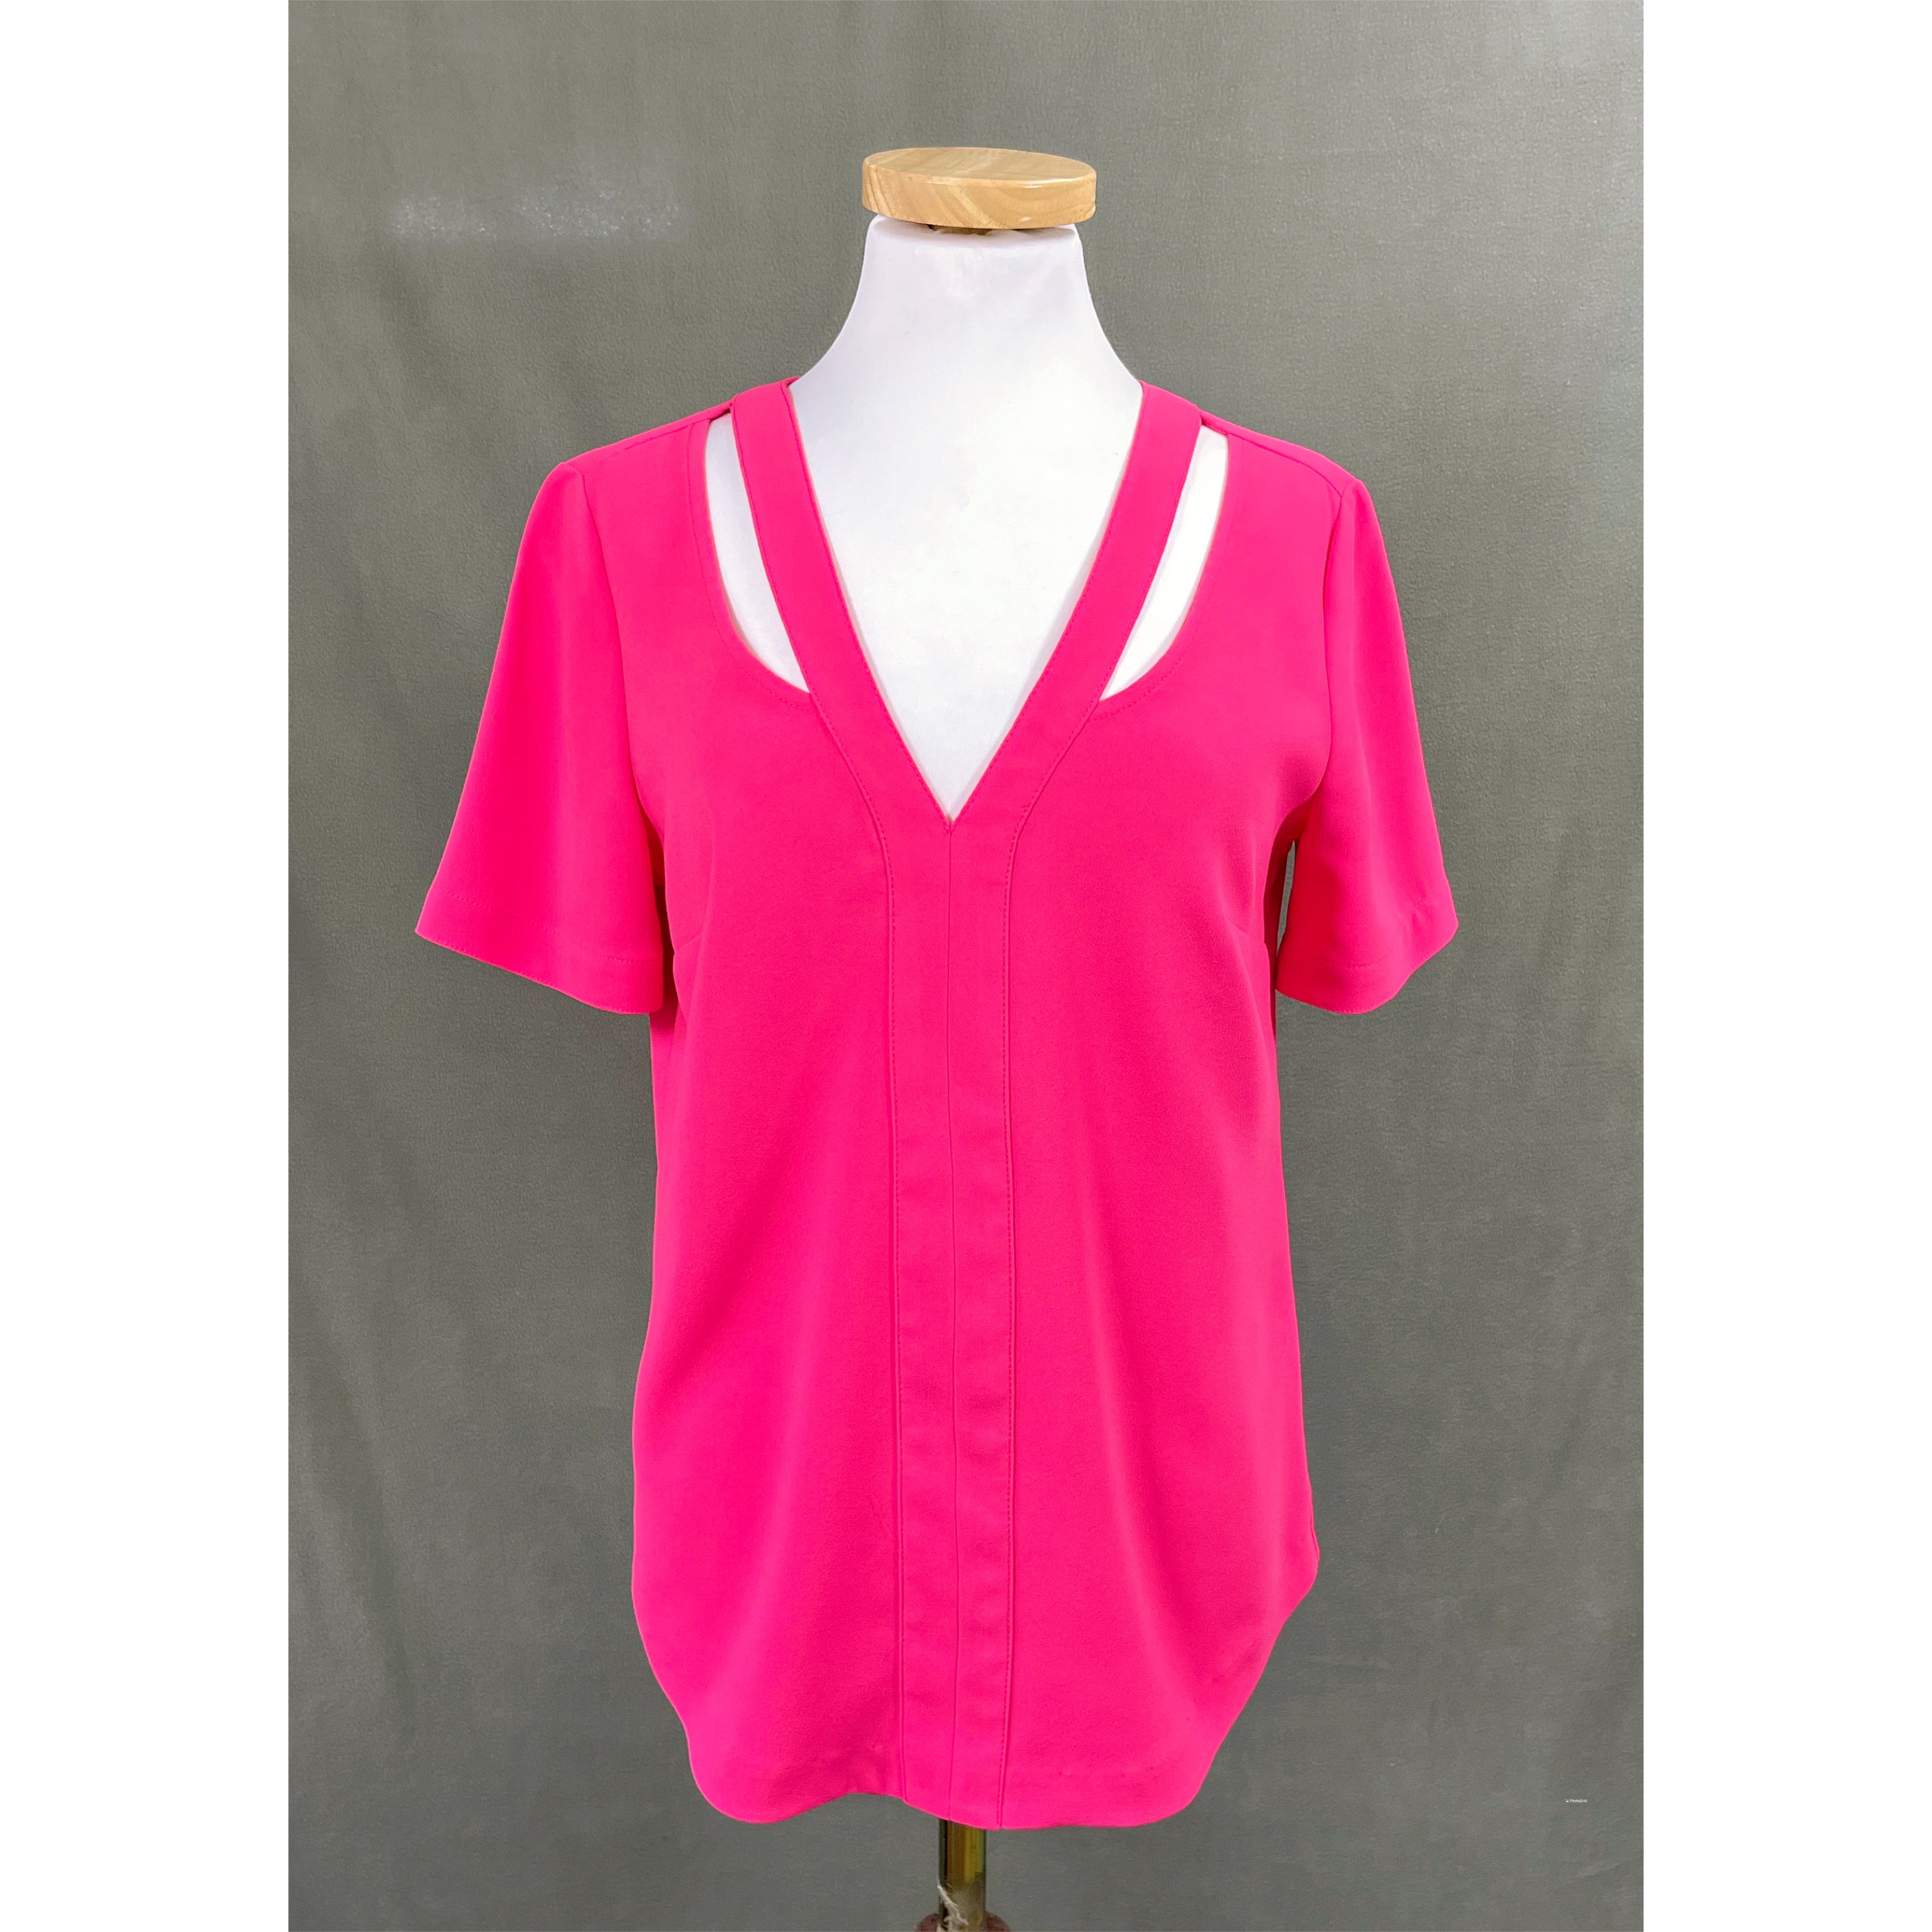 Trina Turk hot pink blouse, size S, NEW WITH TAGS!